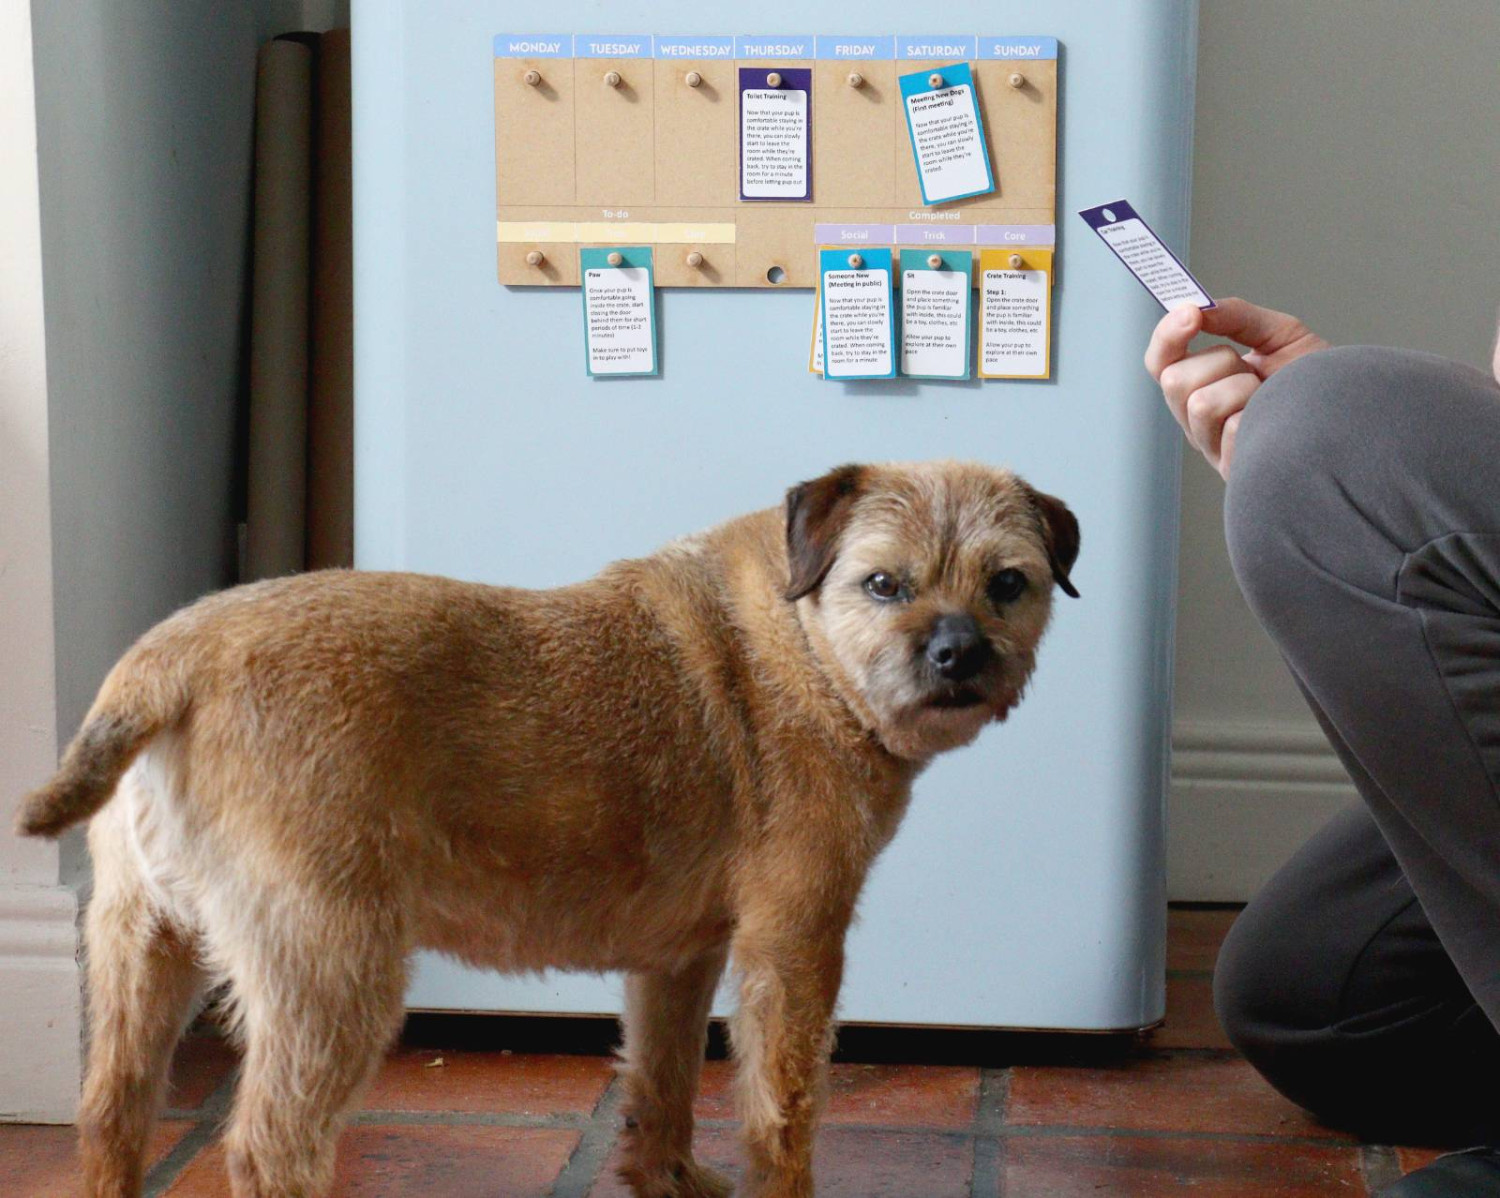 Using the training planner and cards, every member of the household can see where their pup is at with training.